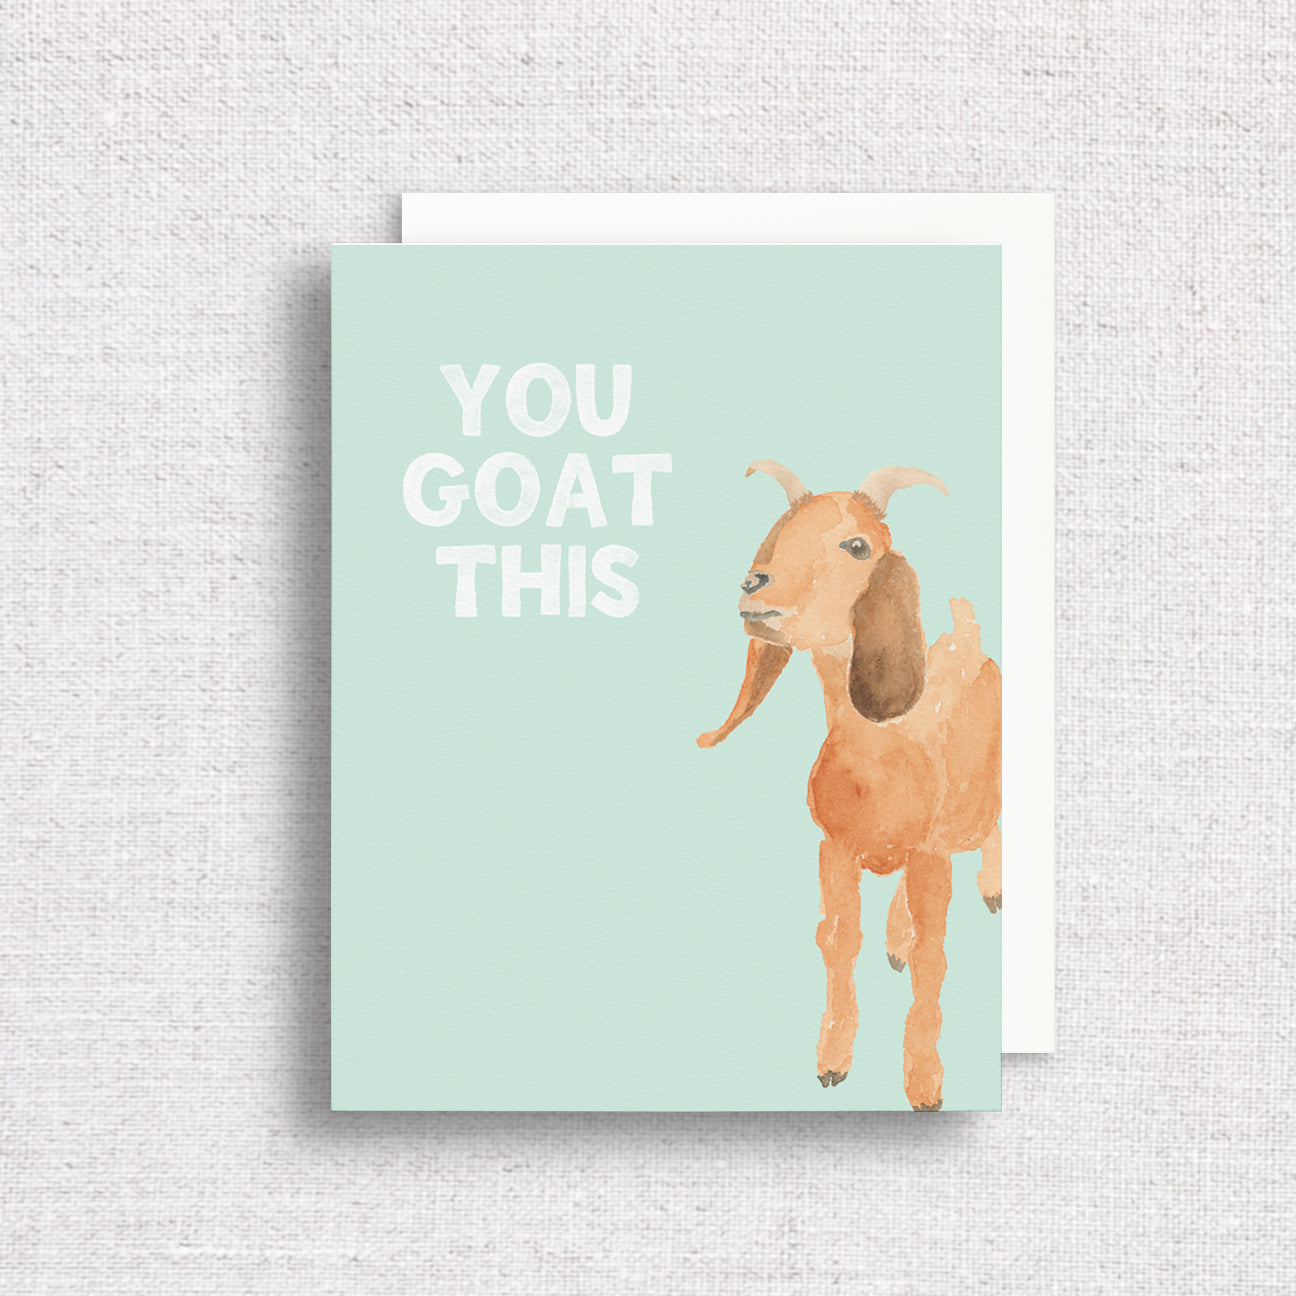 You Goat This Greeting Card by Gert & Co